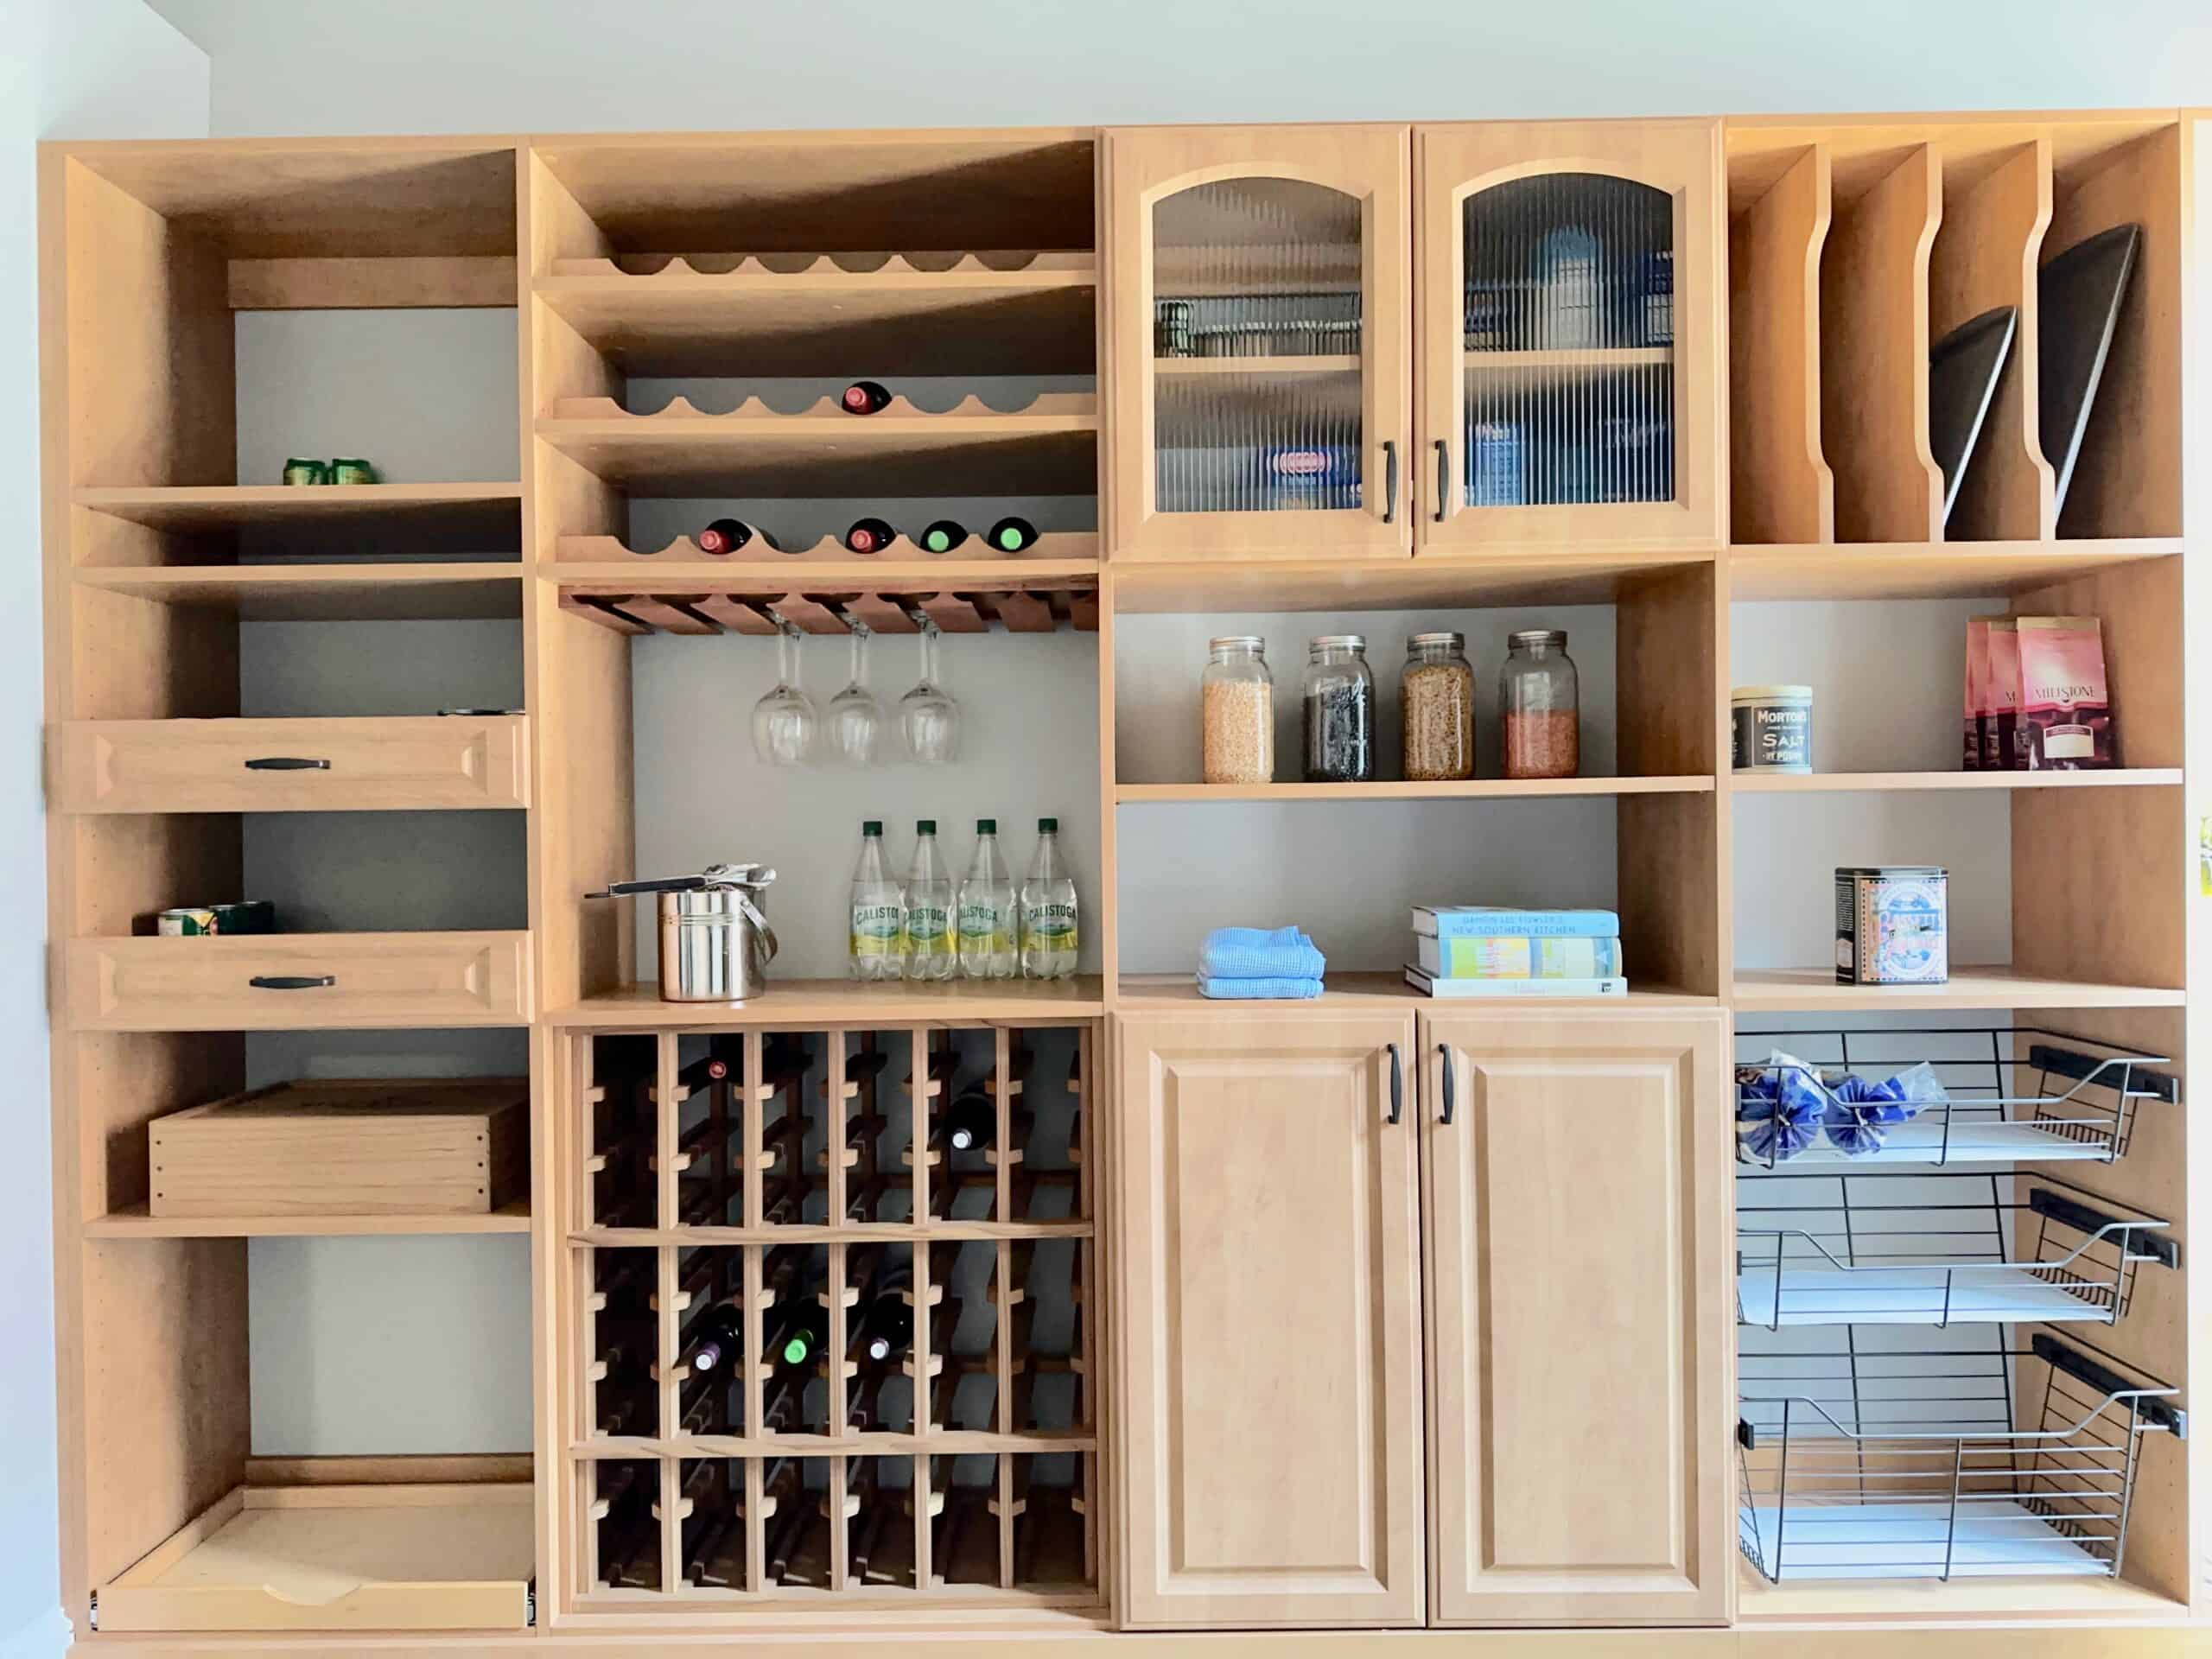 Custom pantry cabinets and storage with maple finish. Glass reed doors. Pull-out trays, adjustable shelving, wine rack storage, wine glass storage, and pull-out wire basket